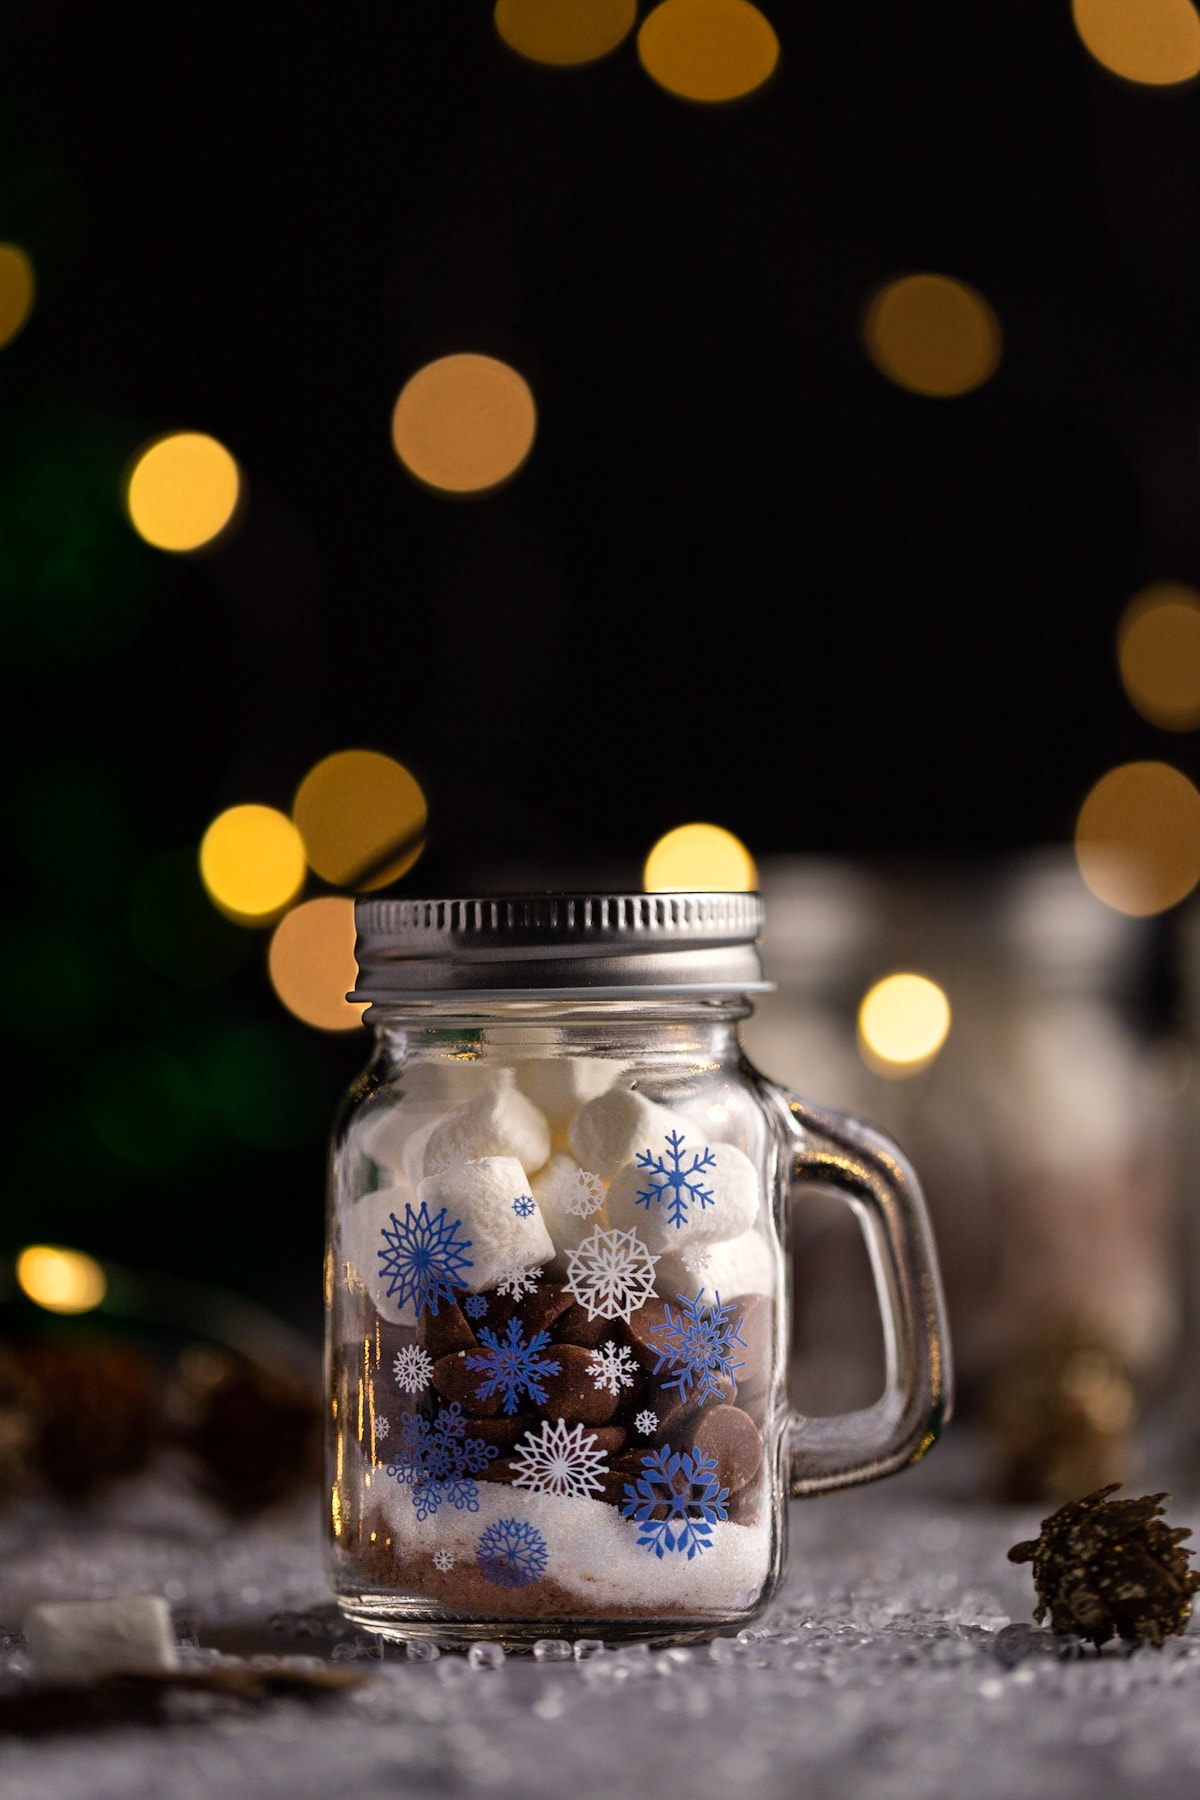 Mason jar hot chocolate with sugar, chocolate chips and marshmallows, christmas lights on a black background.